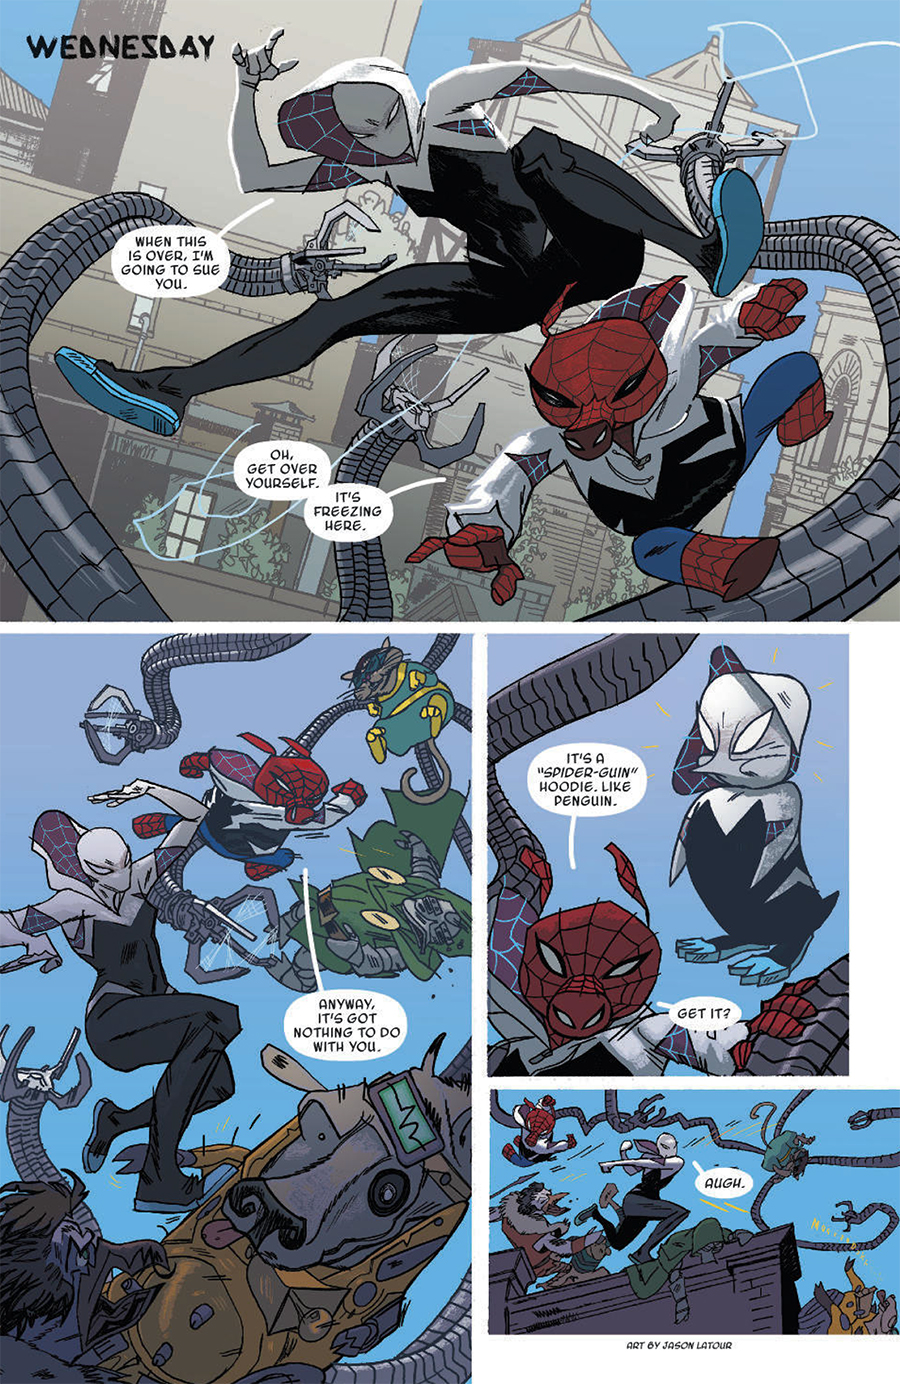 Spider-Gwen Had Better Really Have A Penguin Counterpart Named Spider-Guin